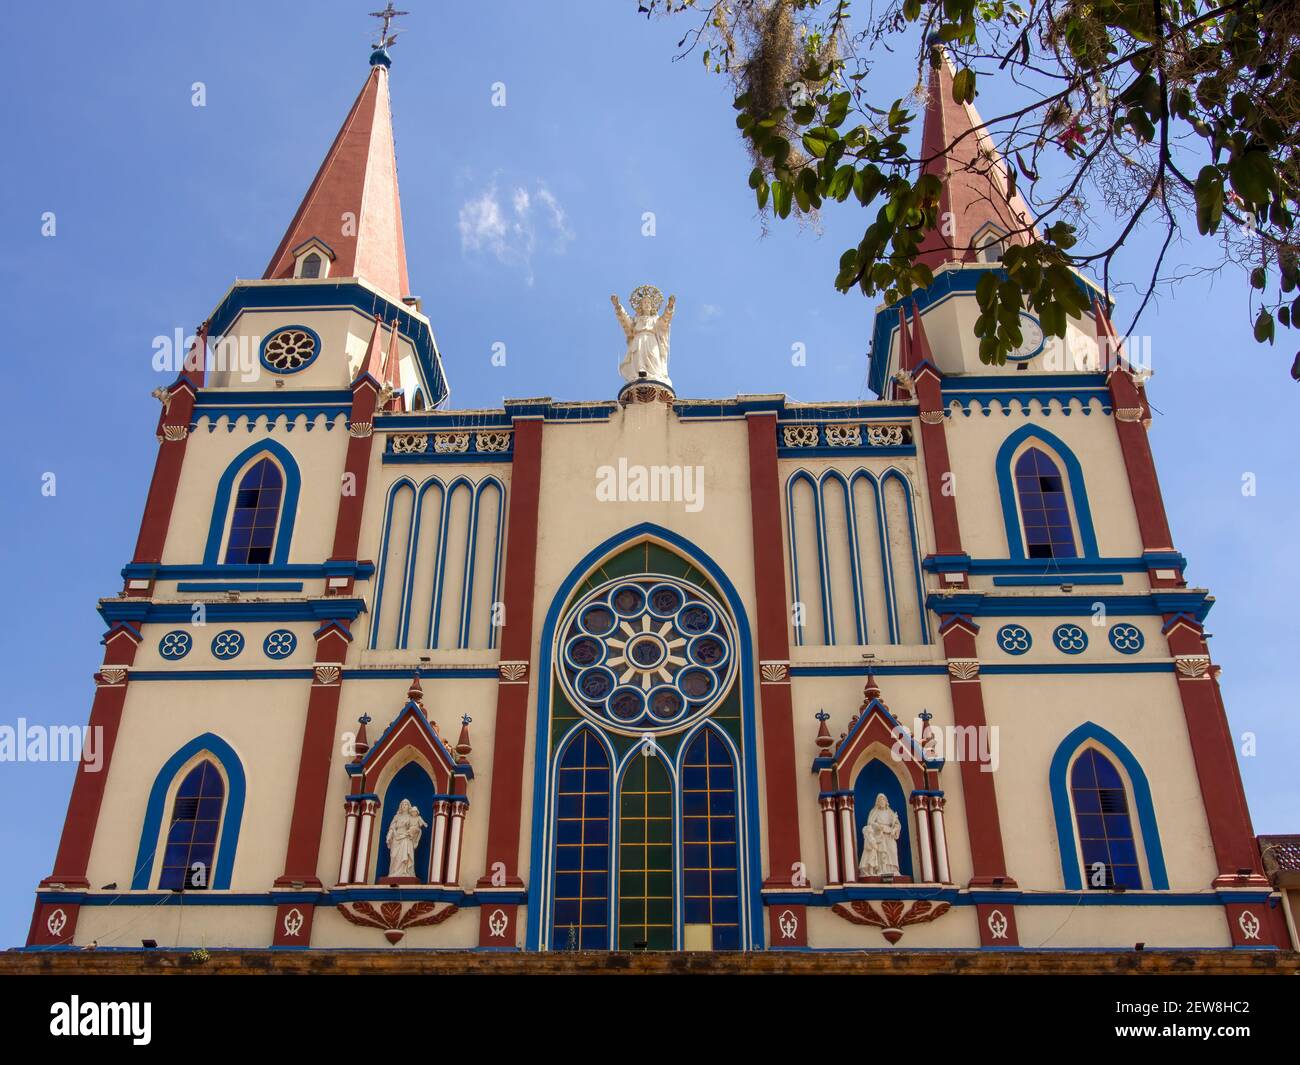 Facade of the Our Lady of the Rosary Basilica in the town of Moniquira, in the department of Boyaca, Colombia. Stock Photo